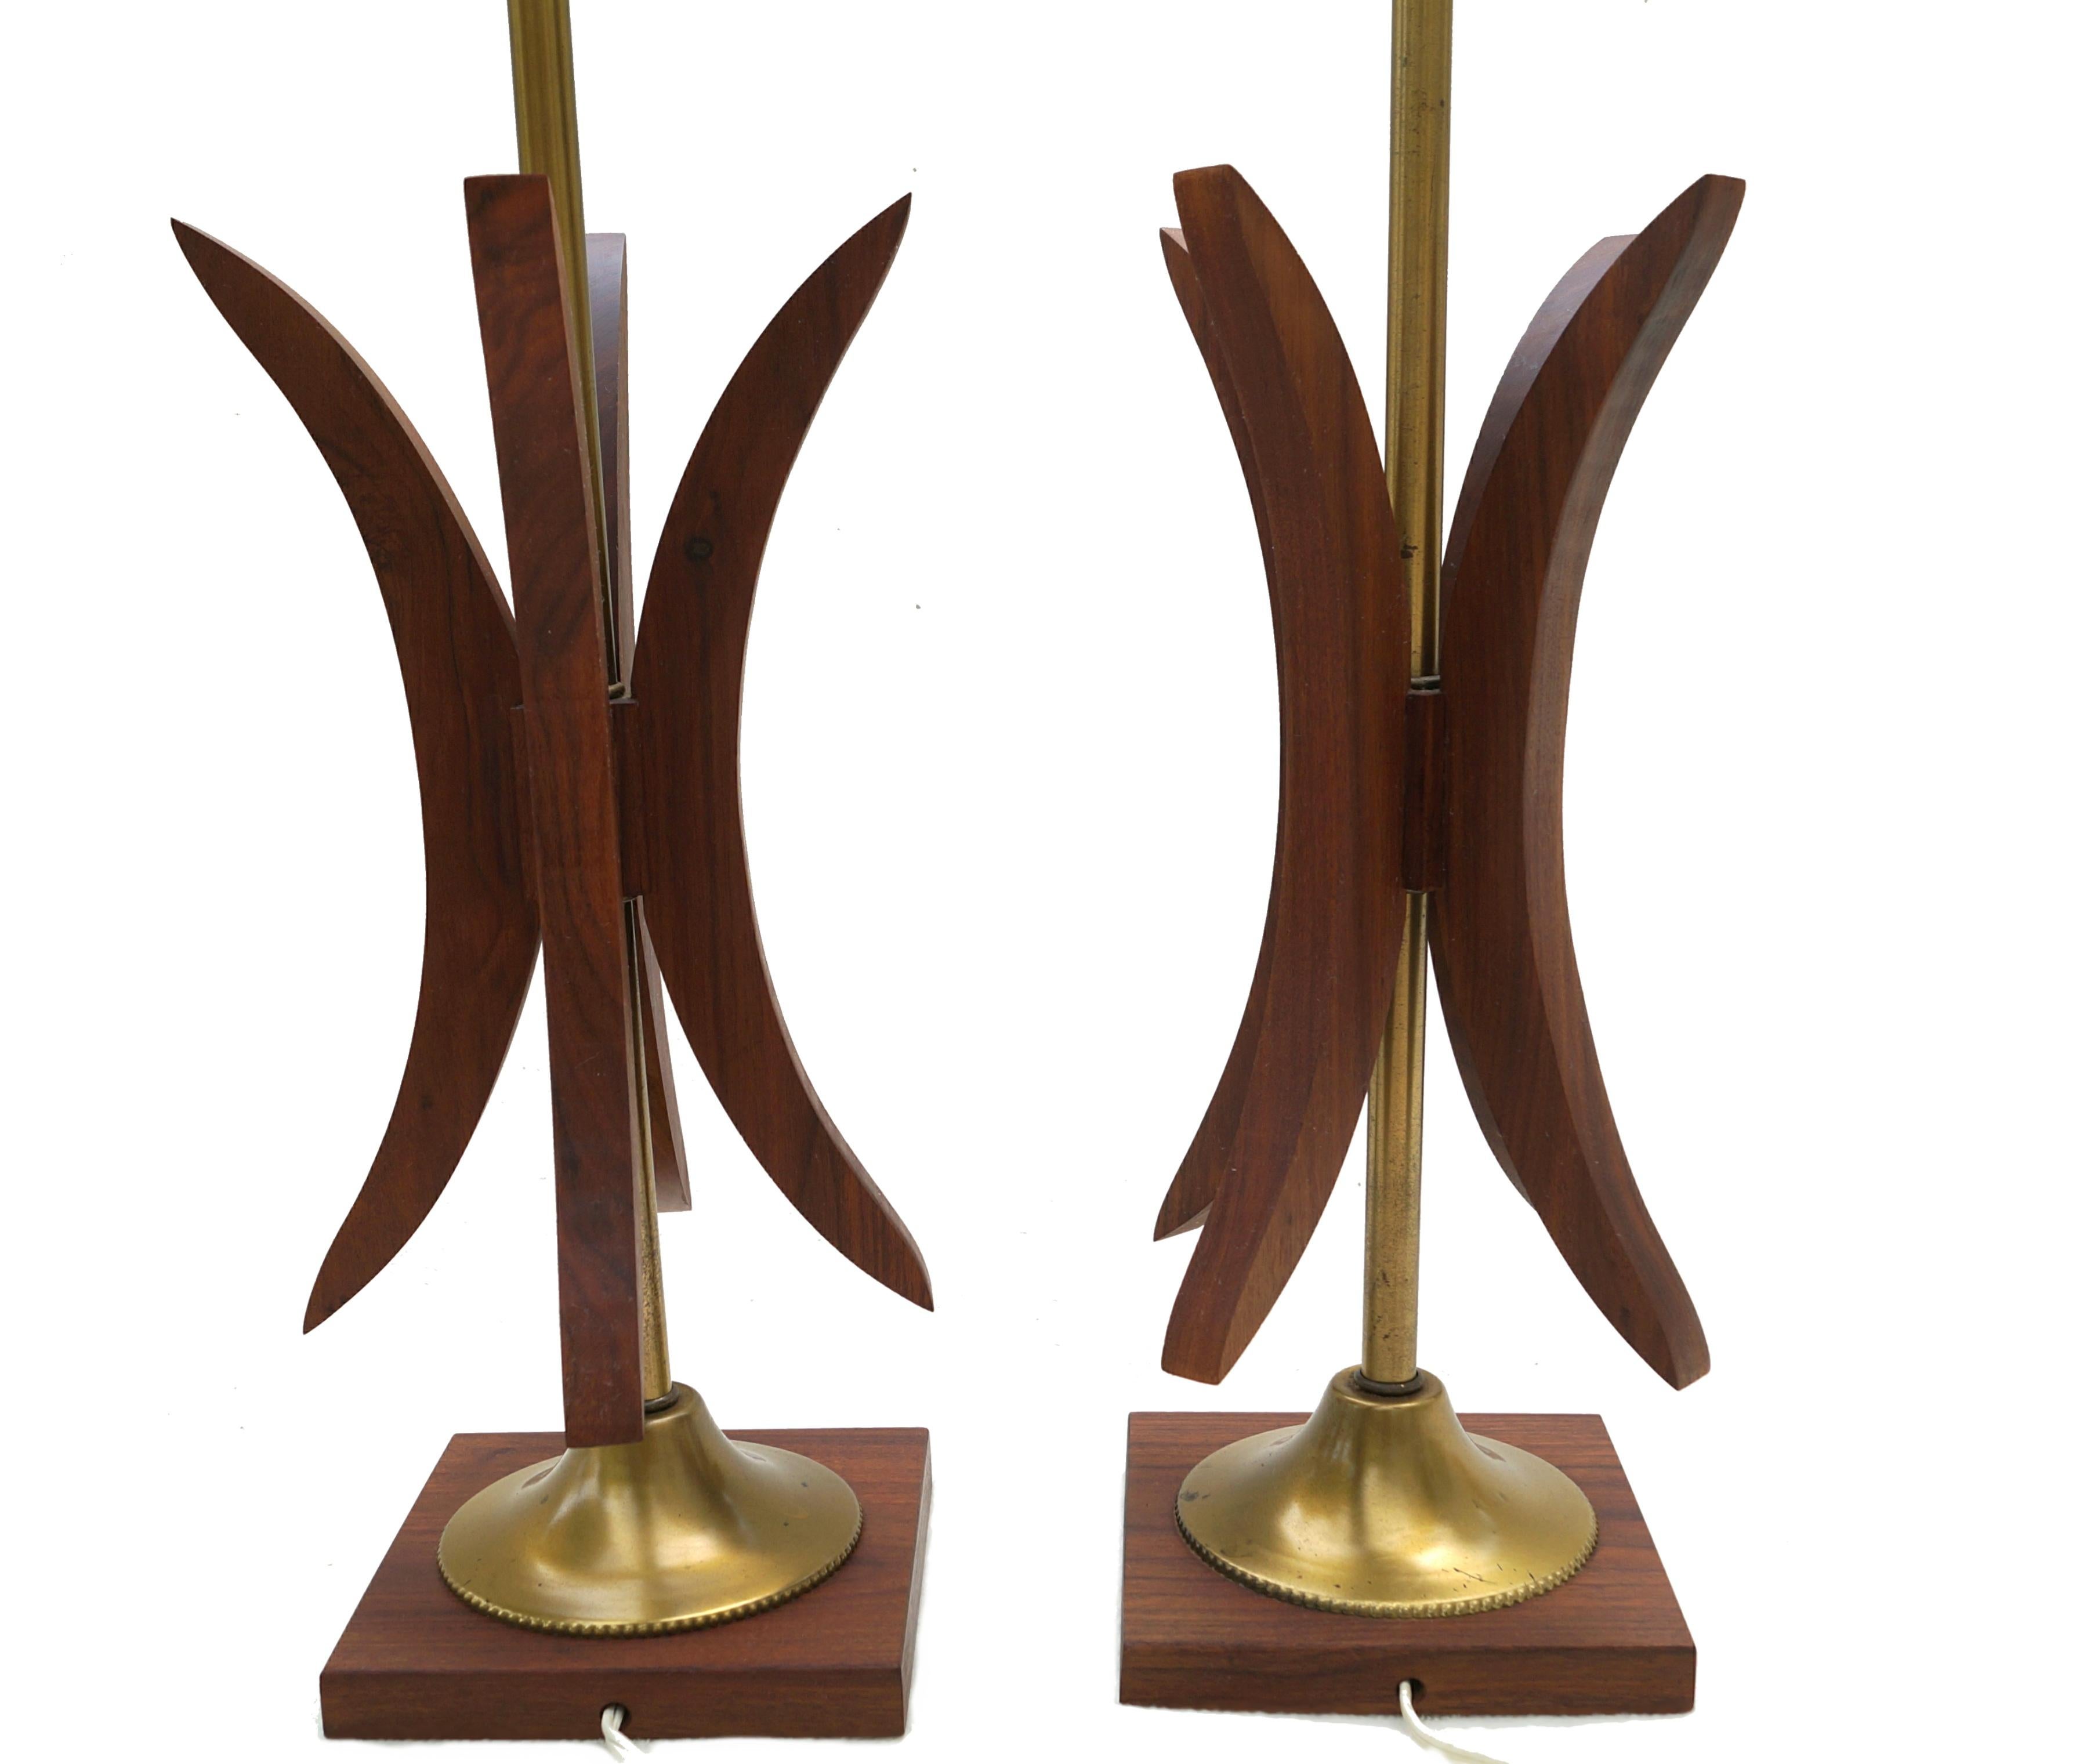 American Pair of Adrian Pearsall Attrib Sculptural Table Lamps Danish Mid-Century Modern For Sale